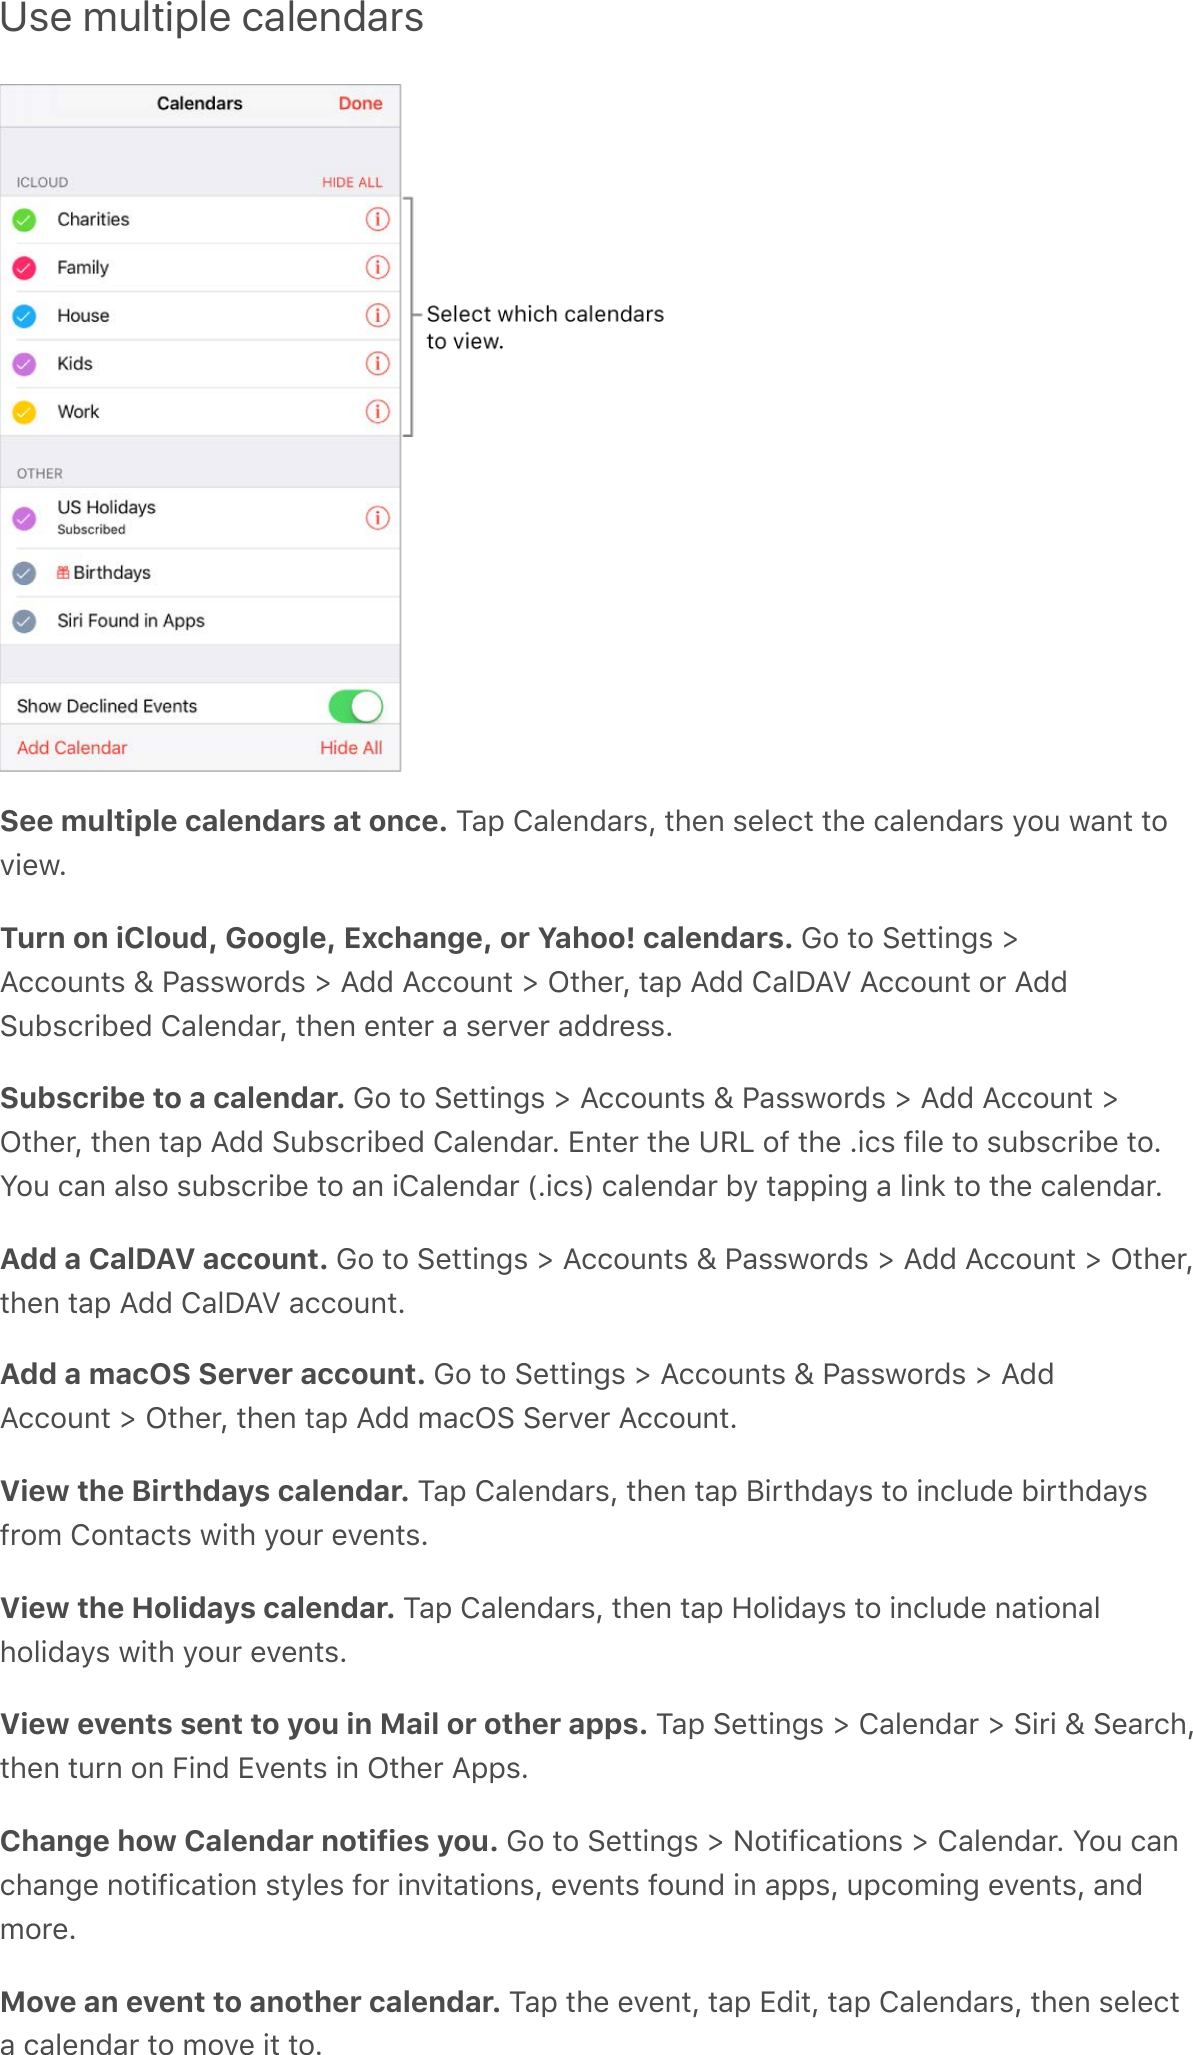 Use multiple calendarsSee multiple calendars at once. 2-6&amp;O-?.#&lt;-,)L&amp;%1.#&amp;).?.9%&amp;%1.&amp;9-?.#&lt;-,)&amp;/&quot;0&amp;H-#%&amp;%&quot;:(.HATurn on iCloud, Google, Exchange, or Yahoo! calendars. G&quot;&amp;%&quot;&amp;E.%%(#5)&amp;d;99&quot;0#%)&amp;i&amp;7-))H&quot;,&lt;)&amp;d&amp;;&lt;&lt;&amp;;99&quot;0#%&amp;d&amp;I%1.,L&amp;%-6&amp;;&lt;&lt;&amp;O-?!;S&amp;;99&quot;0#%&amp;&quot;,&amp;;&lt;&lt;E0@)9,(@.&lt;&amp;O-?.#&lt;-,L&amp;%1.#&amp;.#%.,&amp;-&amp;).,:.,&amp;-&lt;&lt;,.))ASubscribe to a calendar. G&quot;&amp;%&quot;&amp;E.%%(#5)&amp;d&amp;;99&quot;0#%)&amp;i&amp;7-))H&quot;,&lt;)&amp;d&amp;;&lt;&lt;&amp;;99&quot;0#%&amp;dI%1.,L&amp;%1.#&amp;%-6&amp;;&lt;&lt;&amp;E0@)9,(@.&lt;&amp;O-?.#&lt;-,A&amp;V#%.,&amp;%1.&amp;\C=&amp;&quot;8&amp;%1.&amp;A(9)&amp;8(?.&amp;%&quot;&amp;)0@)9,(@.&amp;%&quot;AN&quot;0&amp;9-#&amp;-?)&quot;&amp;)0@)9,(@.&amp;%&quot;&amp;-#&amp;(O-?.#&lt;-,&amp;^A(9)_&amp;9-?.#&lt;-,&amp;@/&amp;%-66(#5&amp;-&amp;?(#3&amp;%&quot;&amp;%1.&amp;9-?.#&lt;-,AAdd a CalDAV account. G&quot;&amp;%&quot;&amp;E.%%(#5)&amp;d&amp;;99&quot;0#%)&amp;i&amp;7-))H&quot;,&lt;)&amp;d&amp;;&lt;&lt;&amp;;99&quot;0#%&amp;d&amp;I%1.,L%1.#&amp;%-6&amp;;&lt;&lt;&amp;O-?!;S&amp;-99&quot;0#%AAdd a macOS Server account. G&quot;&amp;%&quot;&amp;E.%%(#5)&amp;d&amp;;99&quot;0#%)&amp;i&amp;7-))H&quot;,&lt;)&amp;d&amp;;&lt;&lt;;99&quot;0#%&amp;d&amp;I%1.,L&amp;%1.#&amp;%-6&amp;;&lt;&lt;&amp;&apos;-9IE&amp;E.,:.,&amp;;99&quot;0#%AView the Birthdays calendar. 2-6&amp;O-?.#&lt;-,)L&amp;%1.#&amp;%-6&amp;K(,%1&lt;-/)&amp;%&quot;&amp;(#9?0&lt;.&amp;@(,%1&lt;-/)8,&quot;&apos;&amp;O&quot;#%-9%)&amp;H(%1&amp;/&quot;0,&amp;.:.#%)AView the Holidays calendar. 2-6&amp;O-?.#&lt;-,)L&amp;%1.#&amp;%-6&amp;P&quot;?(&lt;-/)&amp;%&quot;&amp;(#9?0&lt;.&amp;#-%(&quot;#-?1&quot;?(&lt;-/)&amp;H(%1&amp;/&quot;0,&amp;.:.#%)AView events sent to you in Mail or other apps. 2-6&amp;E.%%(#5)&amp;d&amp;O-?.#&lt;-,&amp;d&amp;E(,(&amp;i&amp;E.-,91L%1.#&amp;%0,#&amp;&quot;#&amp;+(#&lt;&amp;V:.#%)&amp;(#&amp;I%1.,&amp;;66)AChange how Calendar notifies you. G&quot;&amp;%&quot;&amp;E.%%(#5)&amp;d&amp;&gt;&quot;%(8(9-%(&quot;#)&amp;d&amp;O-?.#&lt;-,A&amp;N&quot;0&amp;9-#91-#5.&amp;#&quot;%(8(9-%(&quot;#&amp;)%/?.)&amp;8&quot;,&amp;(#:(%-%(&quot;#)L&amp;.:.#%)&amp;8&quot;0#&lt;&amp;(#&amp;-66)L&amp;069&quot;&apos;(#5&amp;.:.#%)L&amp;-#&lt;&apos;&quot;,.AMove an event to another calendar. 2-6&amp;%1.&amp;.:.#%L&amp;%-6&amp;V&lt;(%L&amp;%-6&amp;O-?.#&lt;-,)L&amp;%1.#&amp;).?.9%-&amp;9-?.#&lt;-,&amp;%&quot;&amp;&apos;&quot;:.&amp;(%&amp;%&quot;A